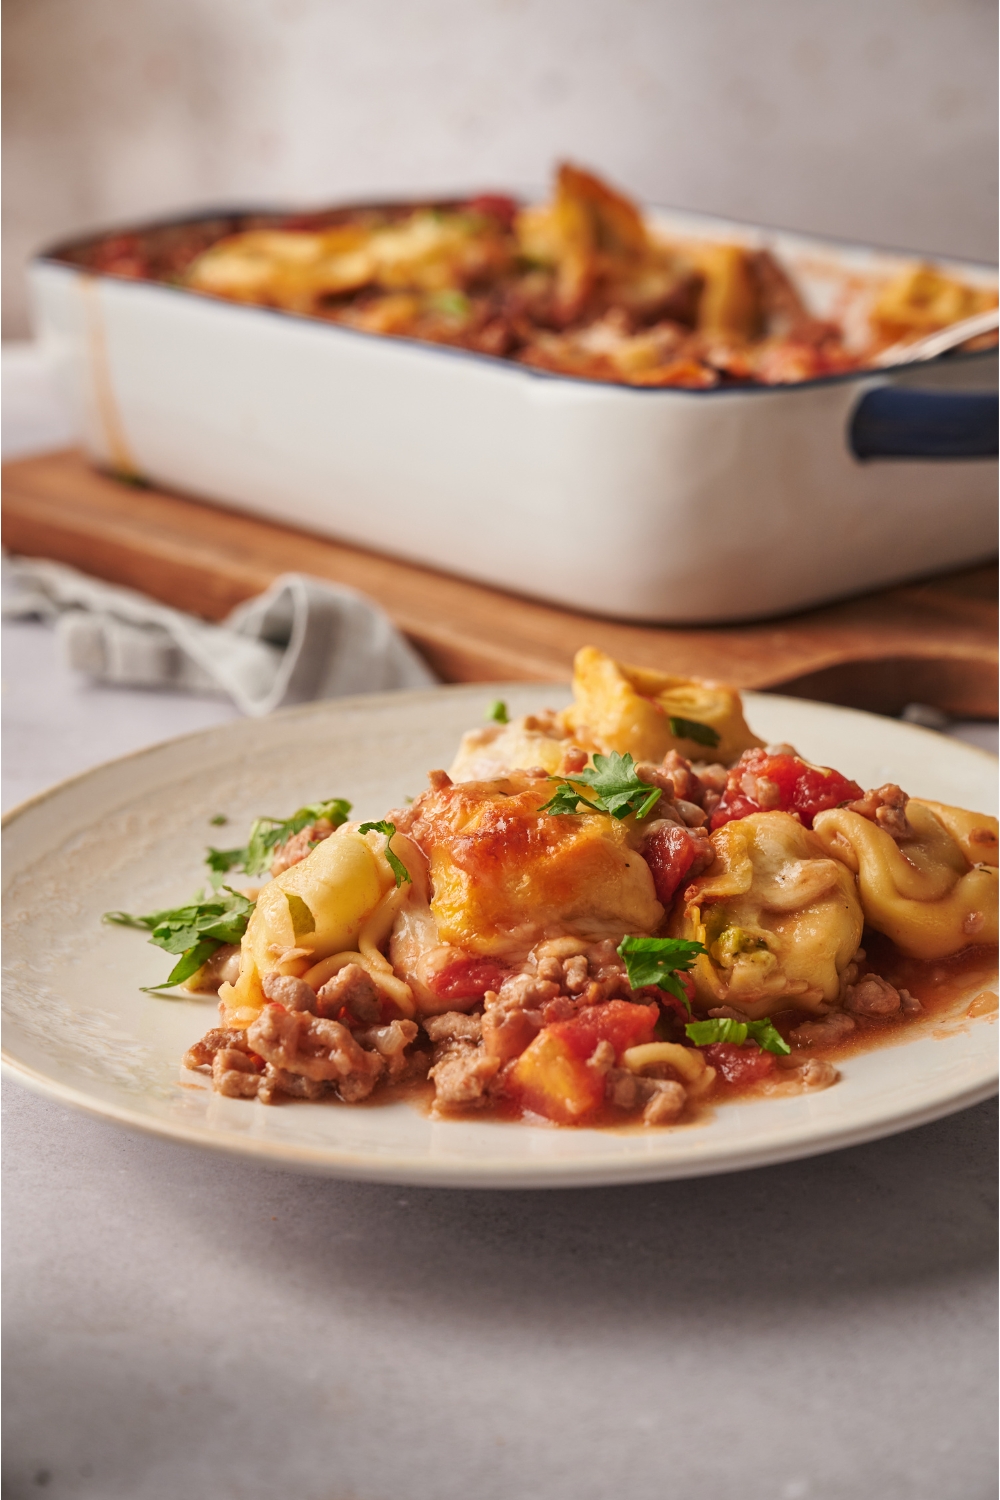 A serving of tortellini casserole with chunks of ground beef, cooked tomatoes, melted cheese, and fresh herbs.